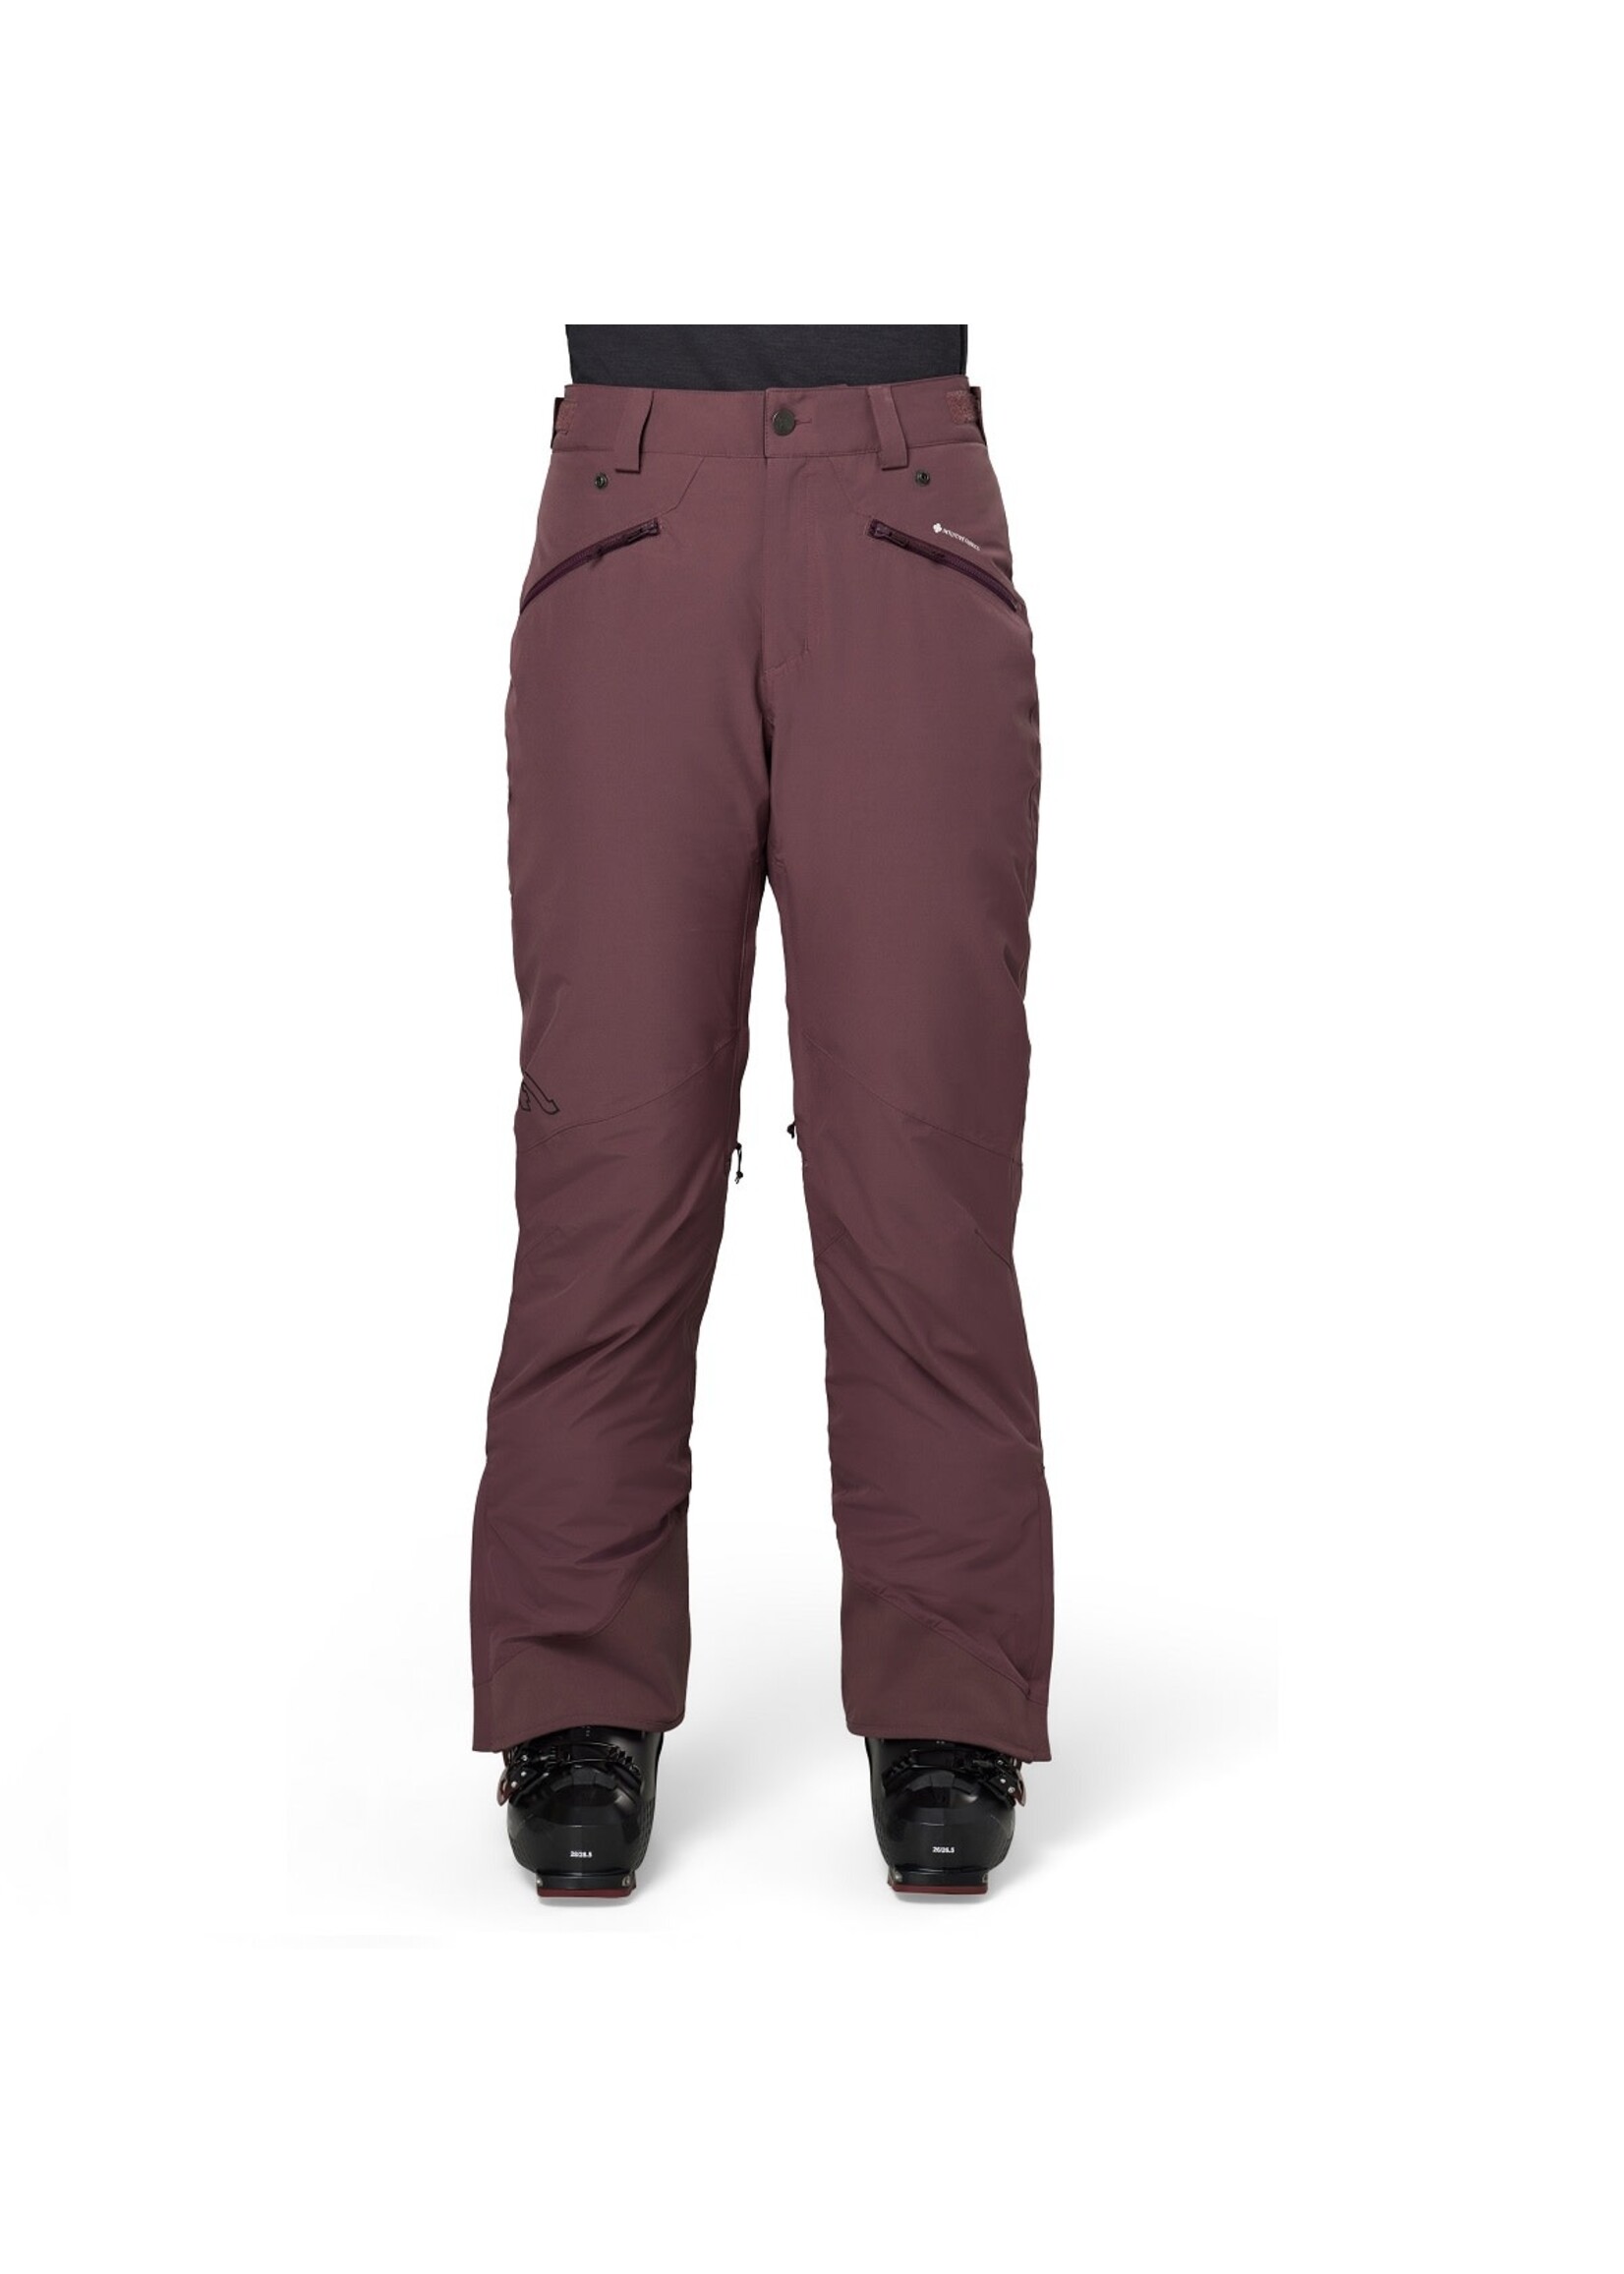 Flylow Flylow Daisy Insulated Pant